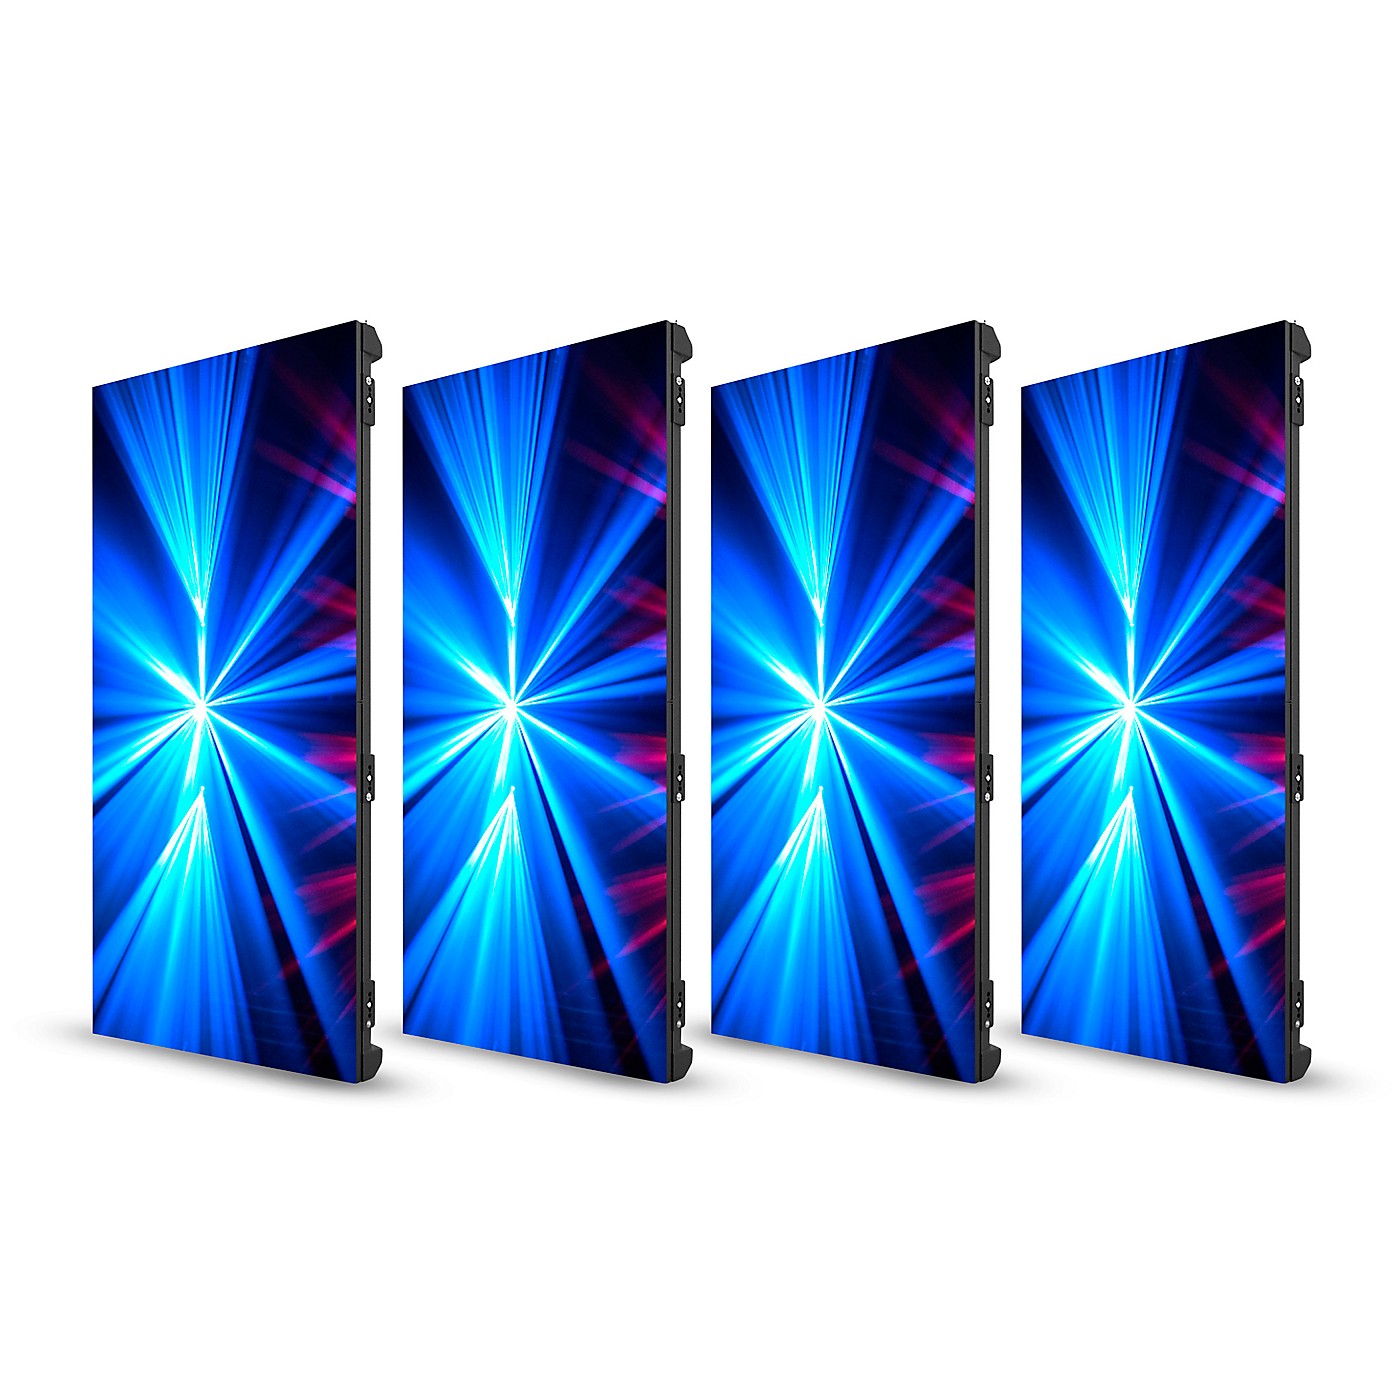 Chauvet 4-Pack of Vivid 4 Modular Video Panels With Road Case thumbnail